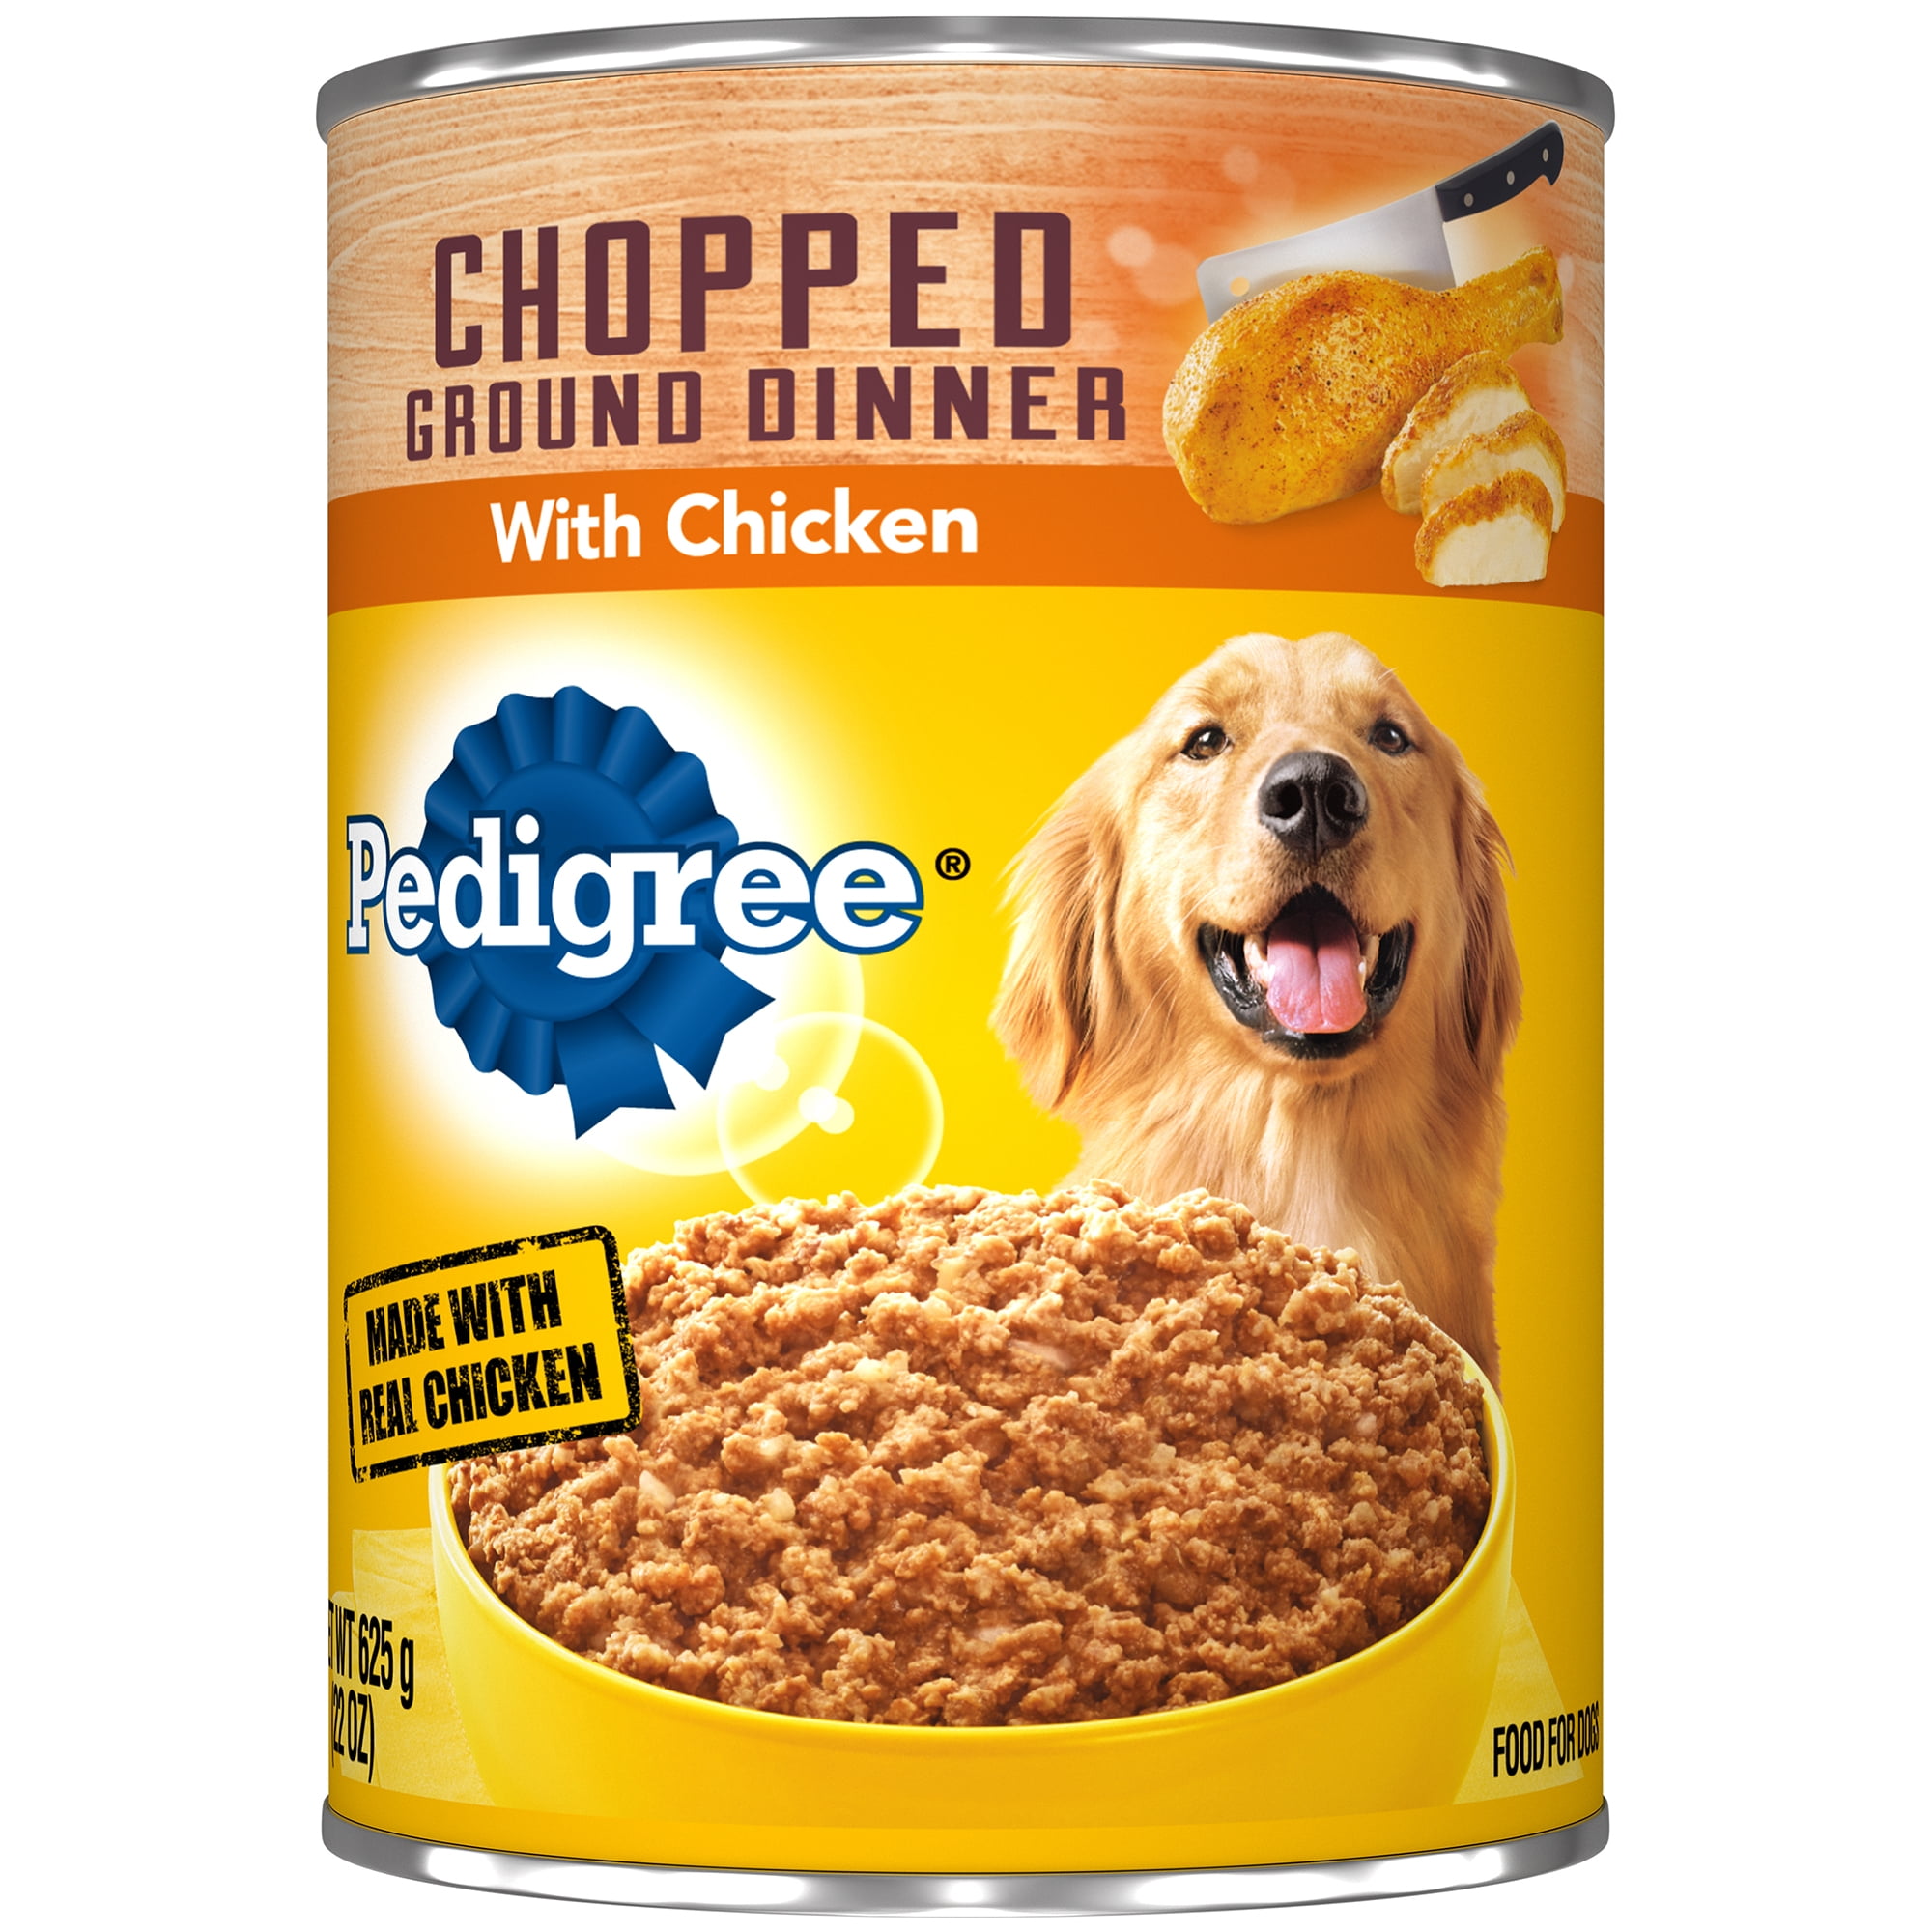 Pedigree Chopped Ground Dinner With Chicken Adult Canned Wet Dog Food